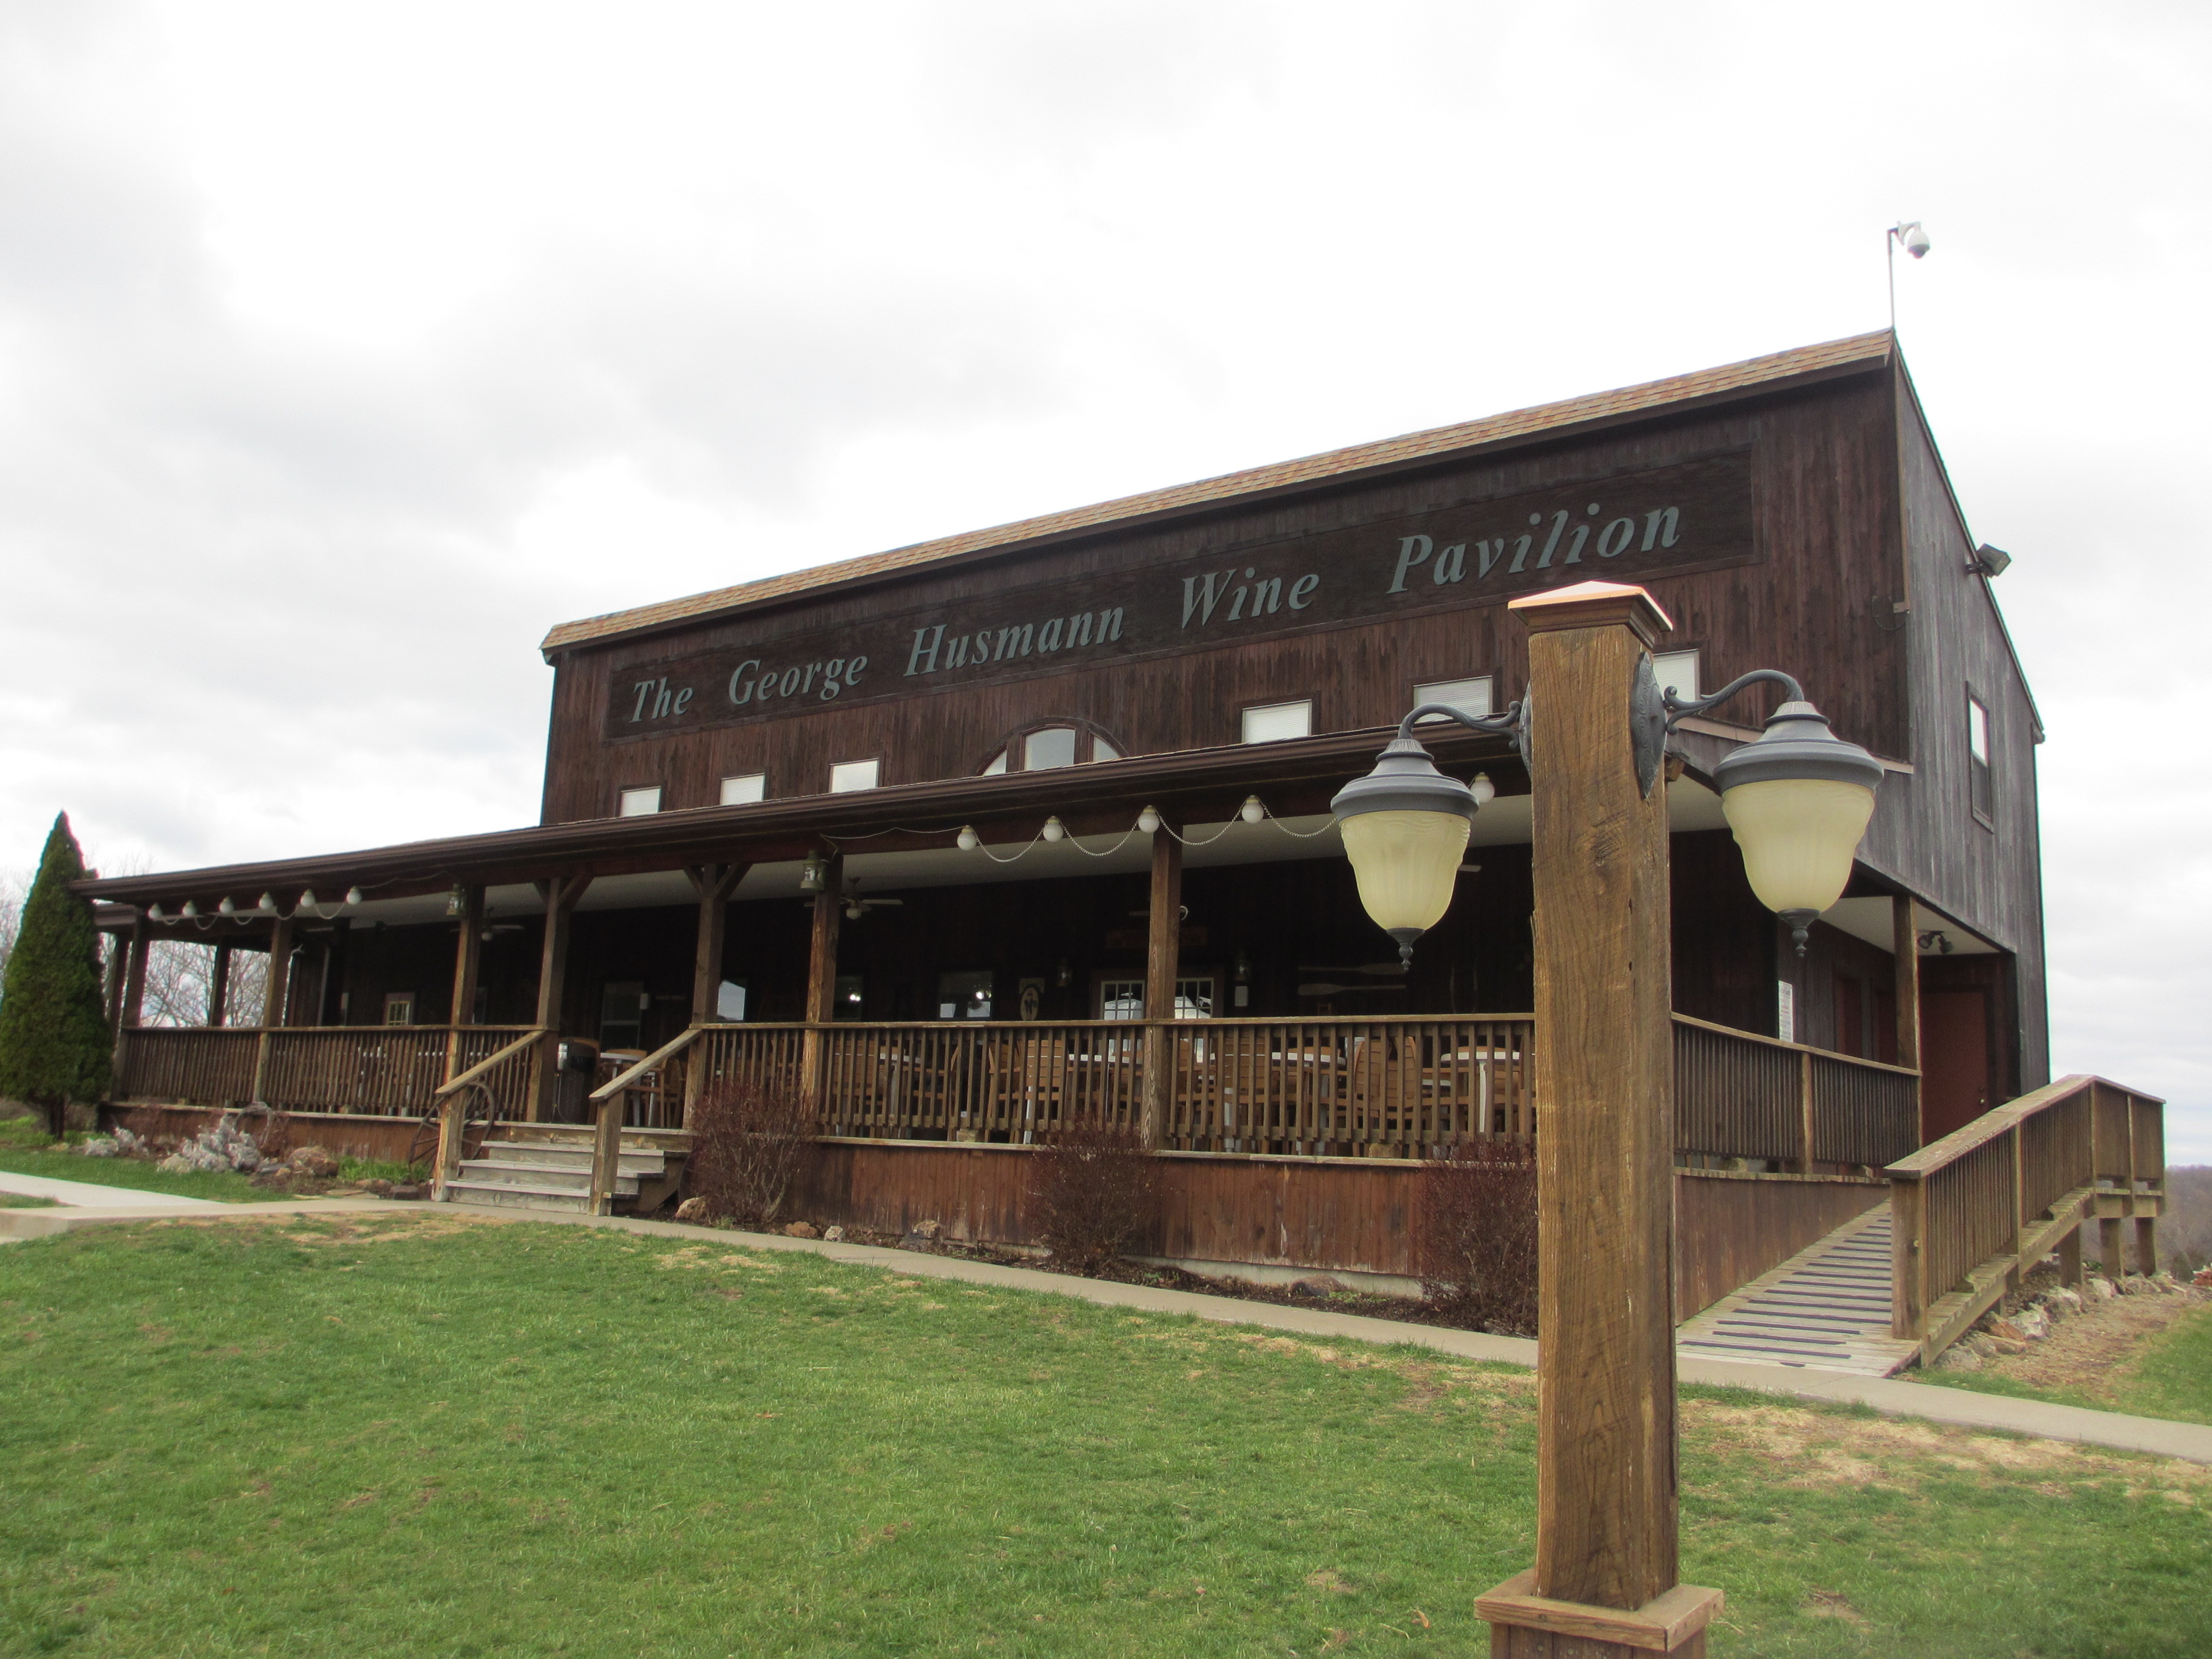 Oak Glenn Winery LLC- A brown wooden building with a large deck. The sign on the building reads "The George Husmann Wine Pavilion".